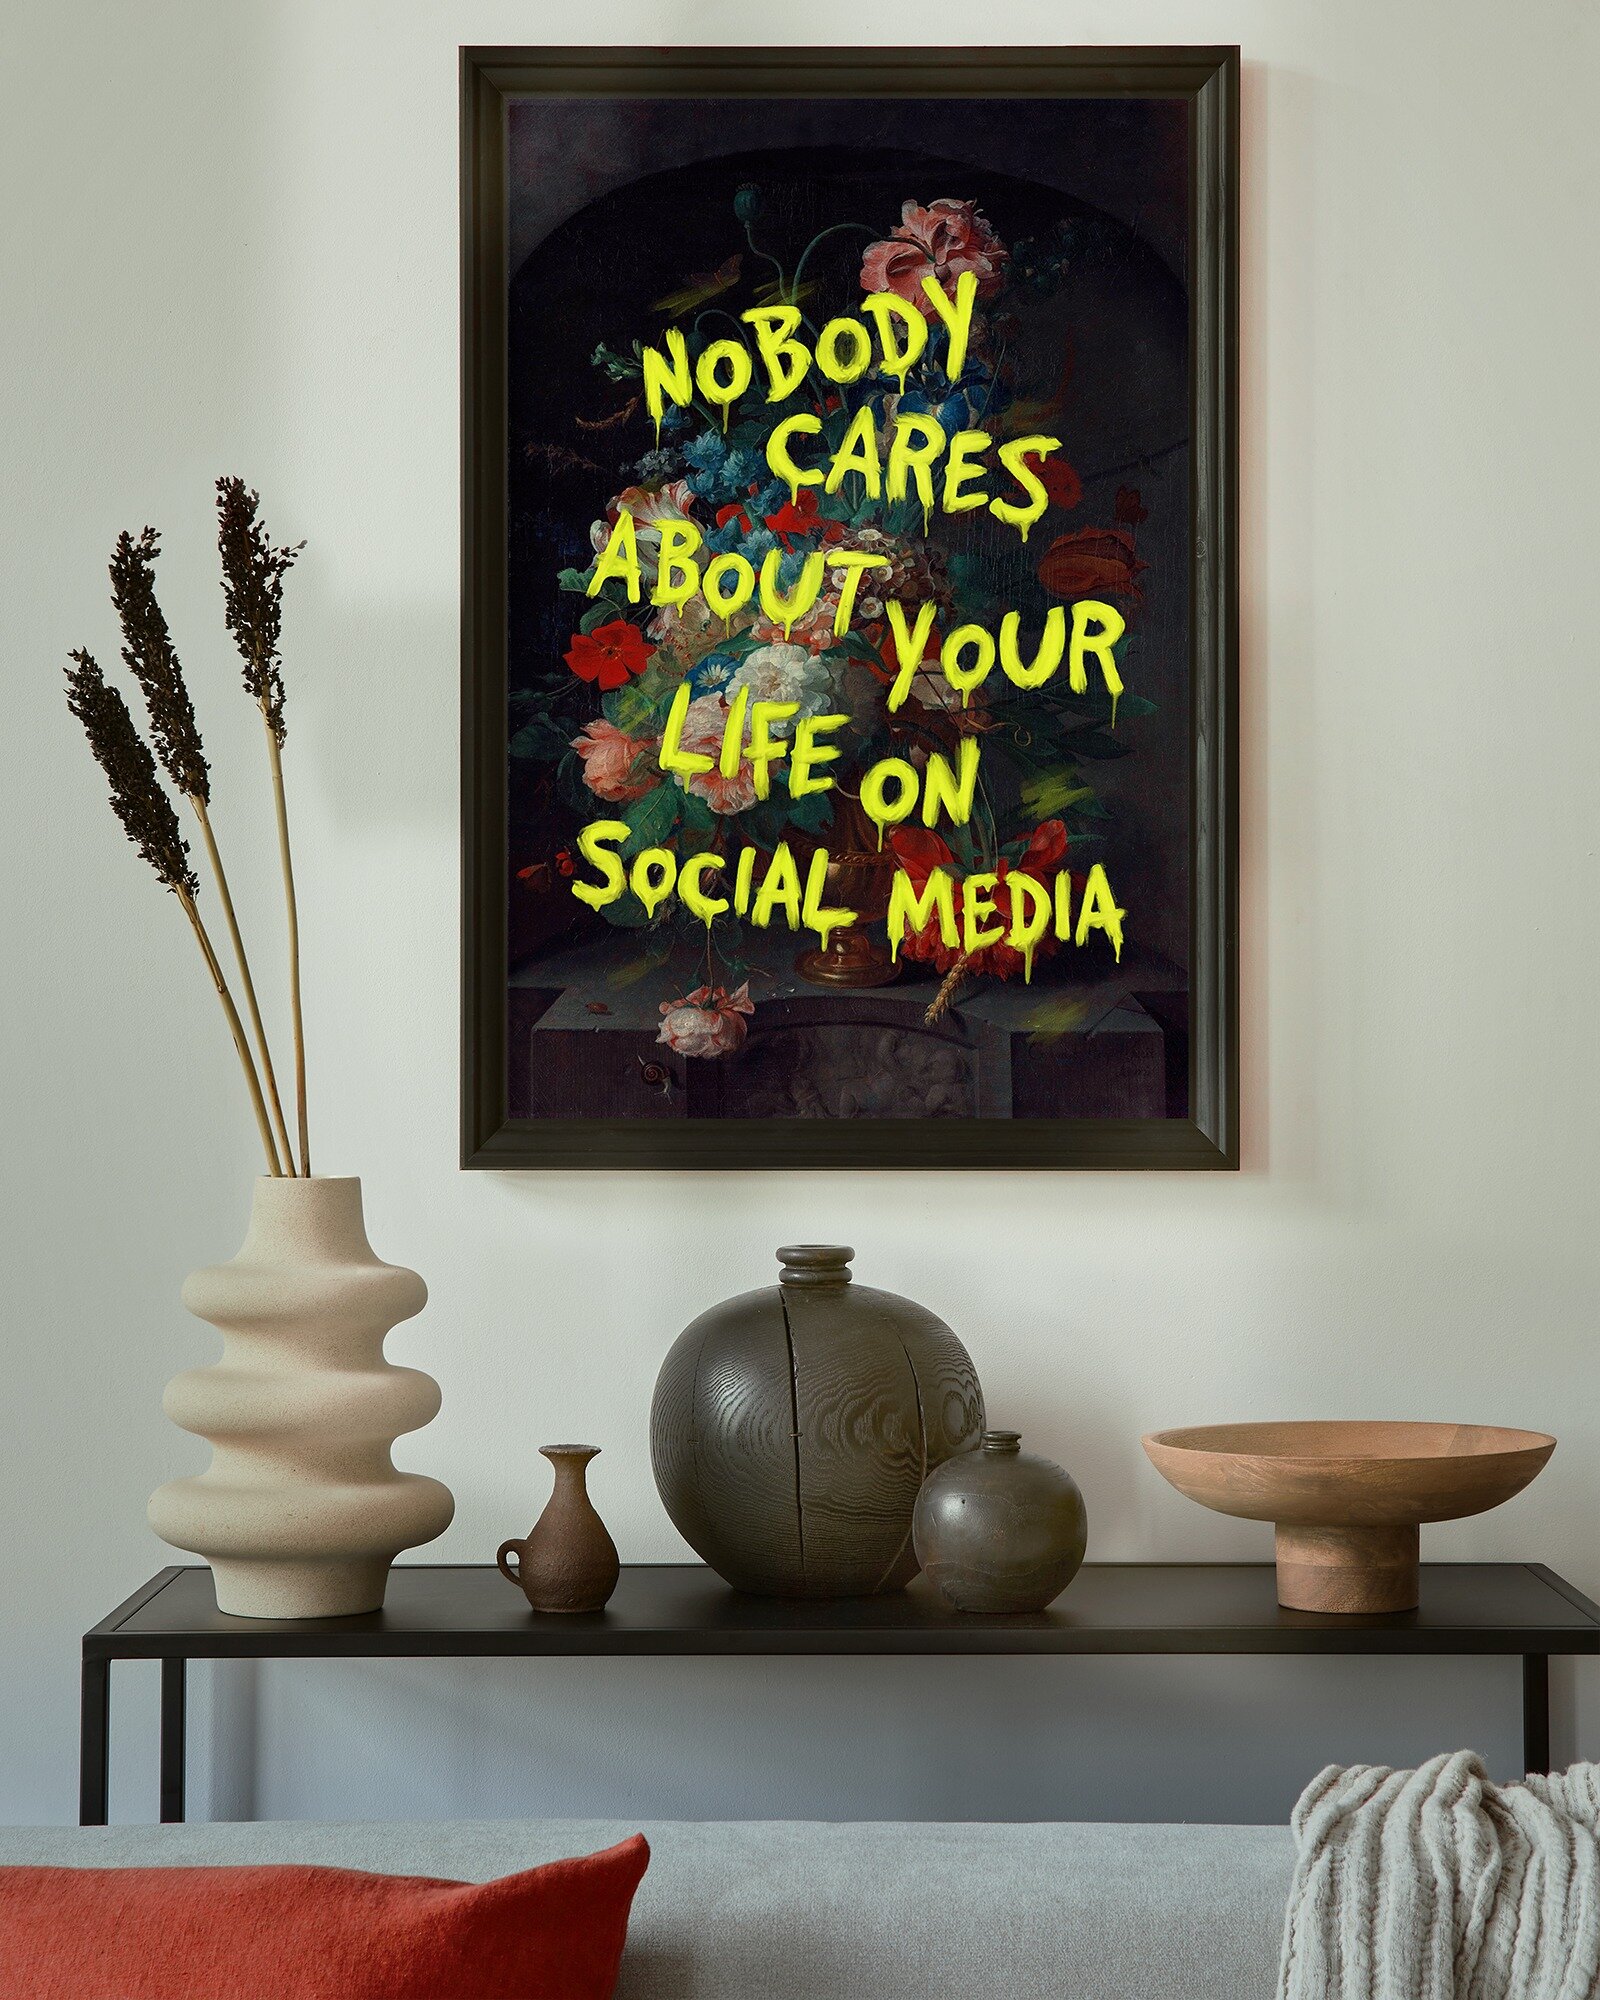 Transporting back to a bygone era, where authenticity thrived and social media didn't define our worth. Let this vintage masterpiece remind us to cherish real connections and live in the moment. #vintagepop #wallart #posterdesign -Werbung/Ad- Now ava